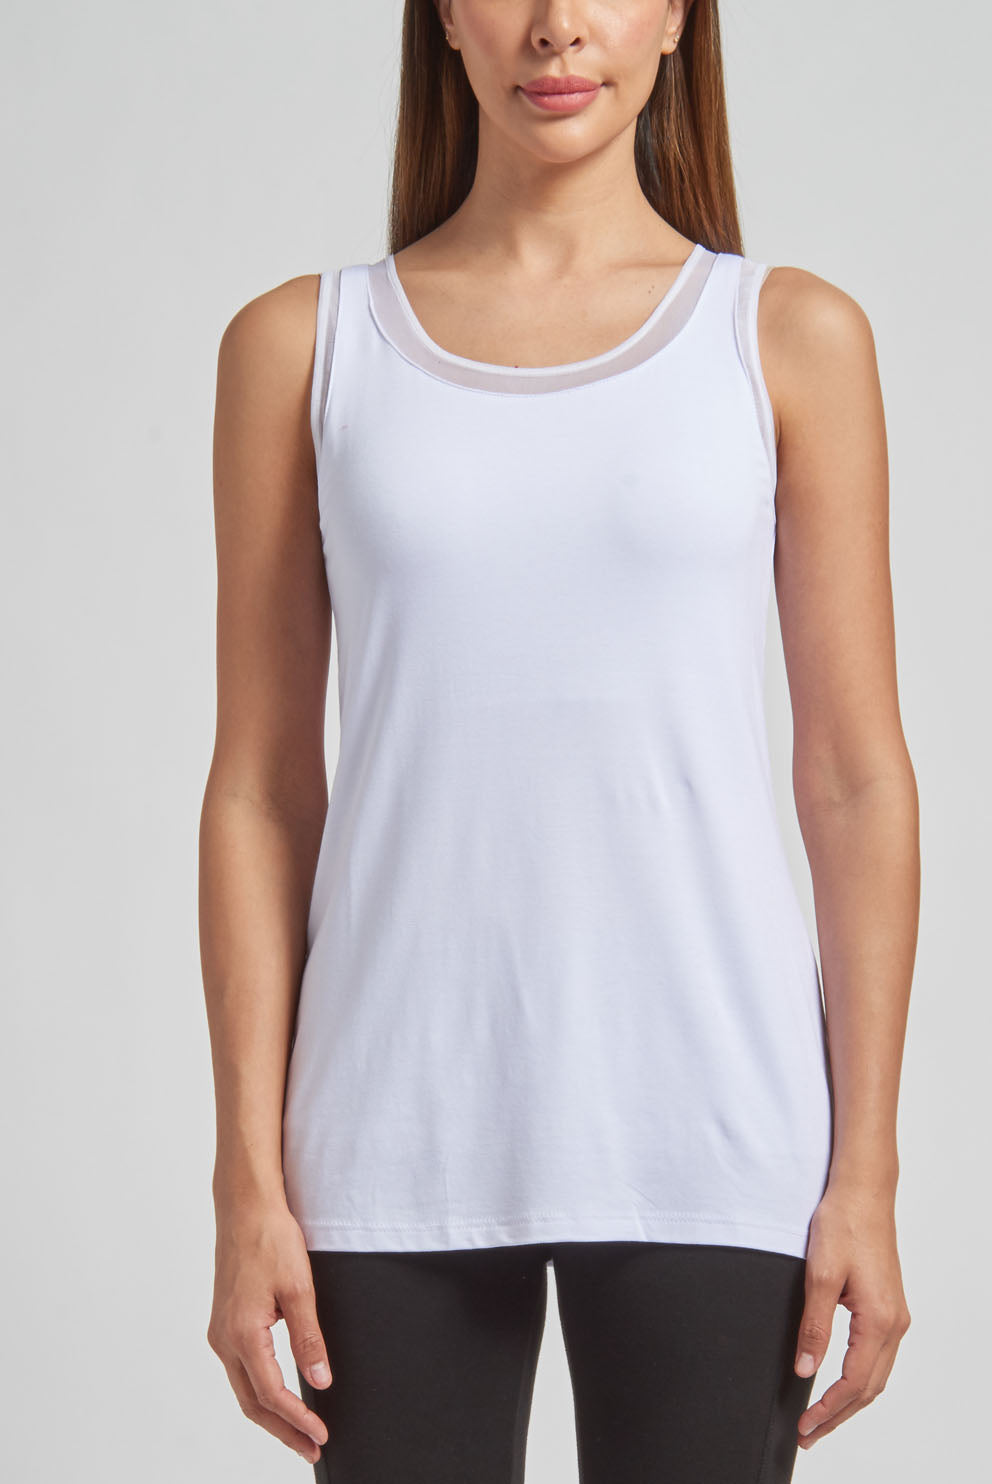 Tank Top with Sheer Trim and Tummy Control Panel – Lynn Ritchie